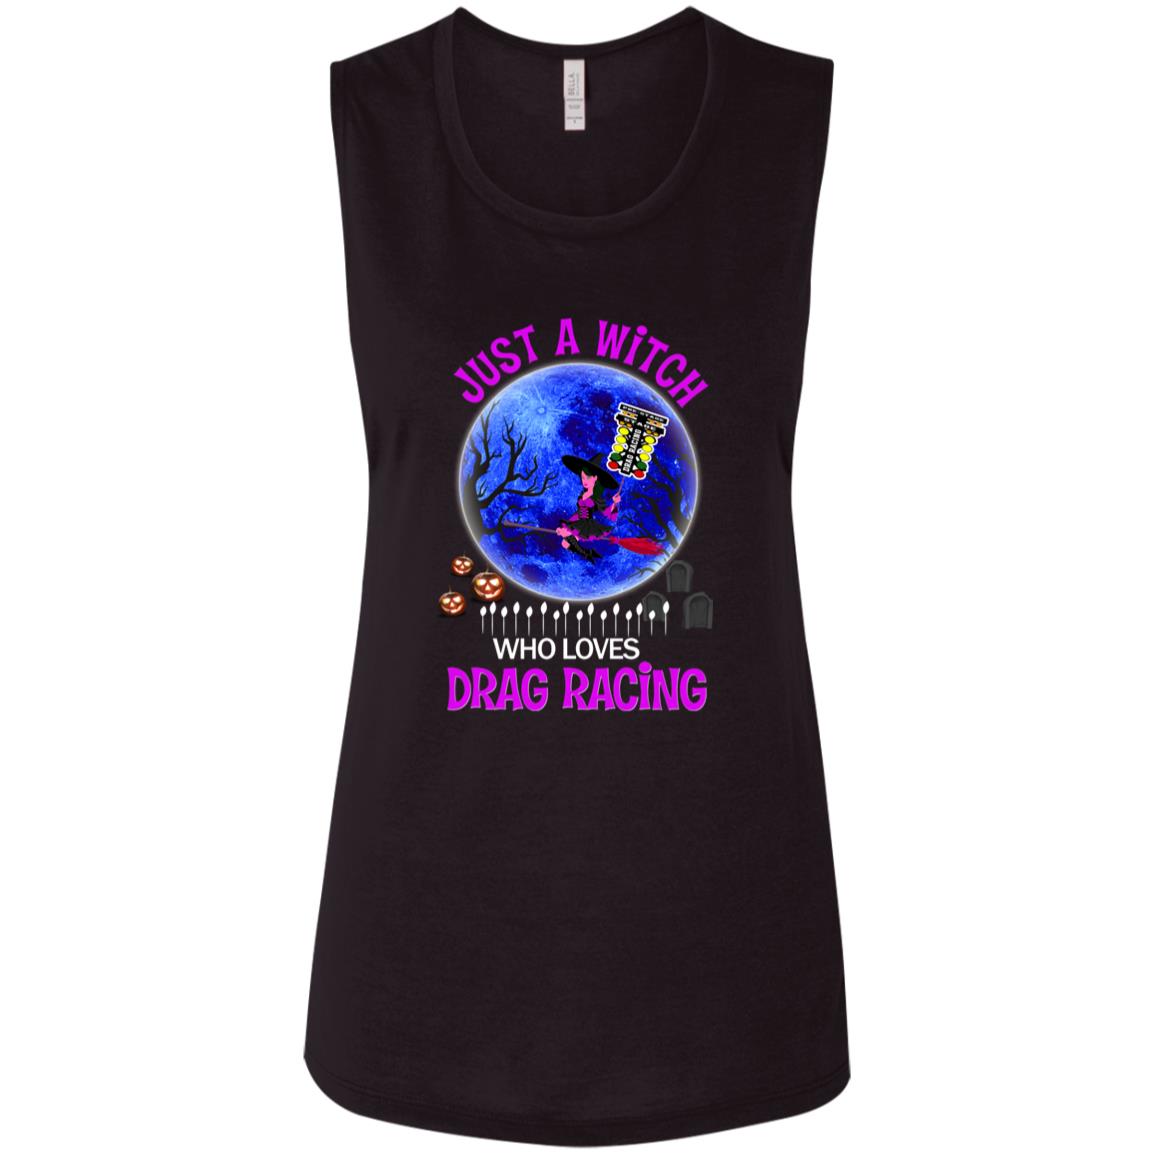 Just A Witch Who Loves Drag Racing Ladies' Flowy Muscle Tank